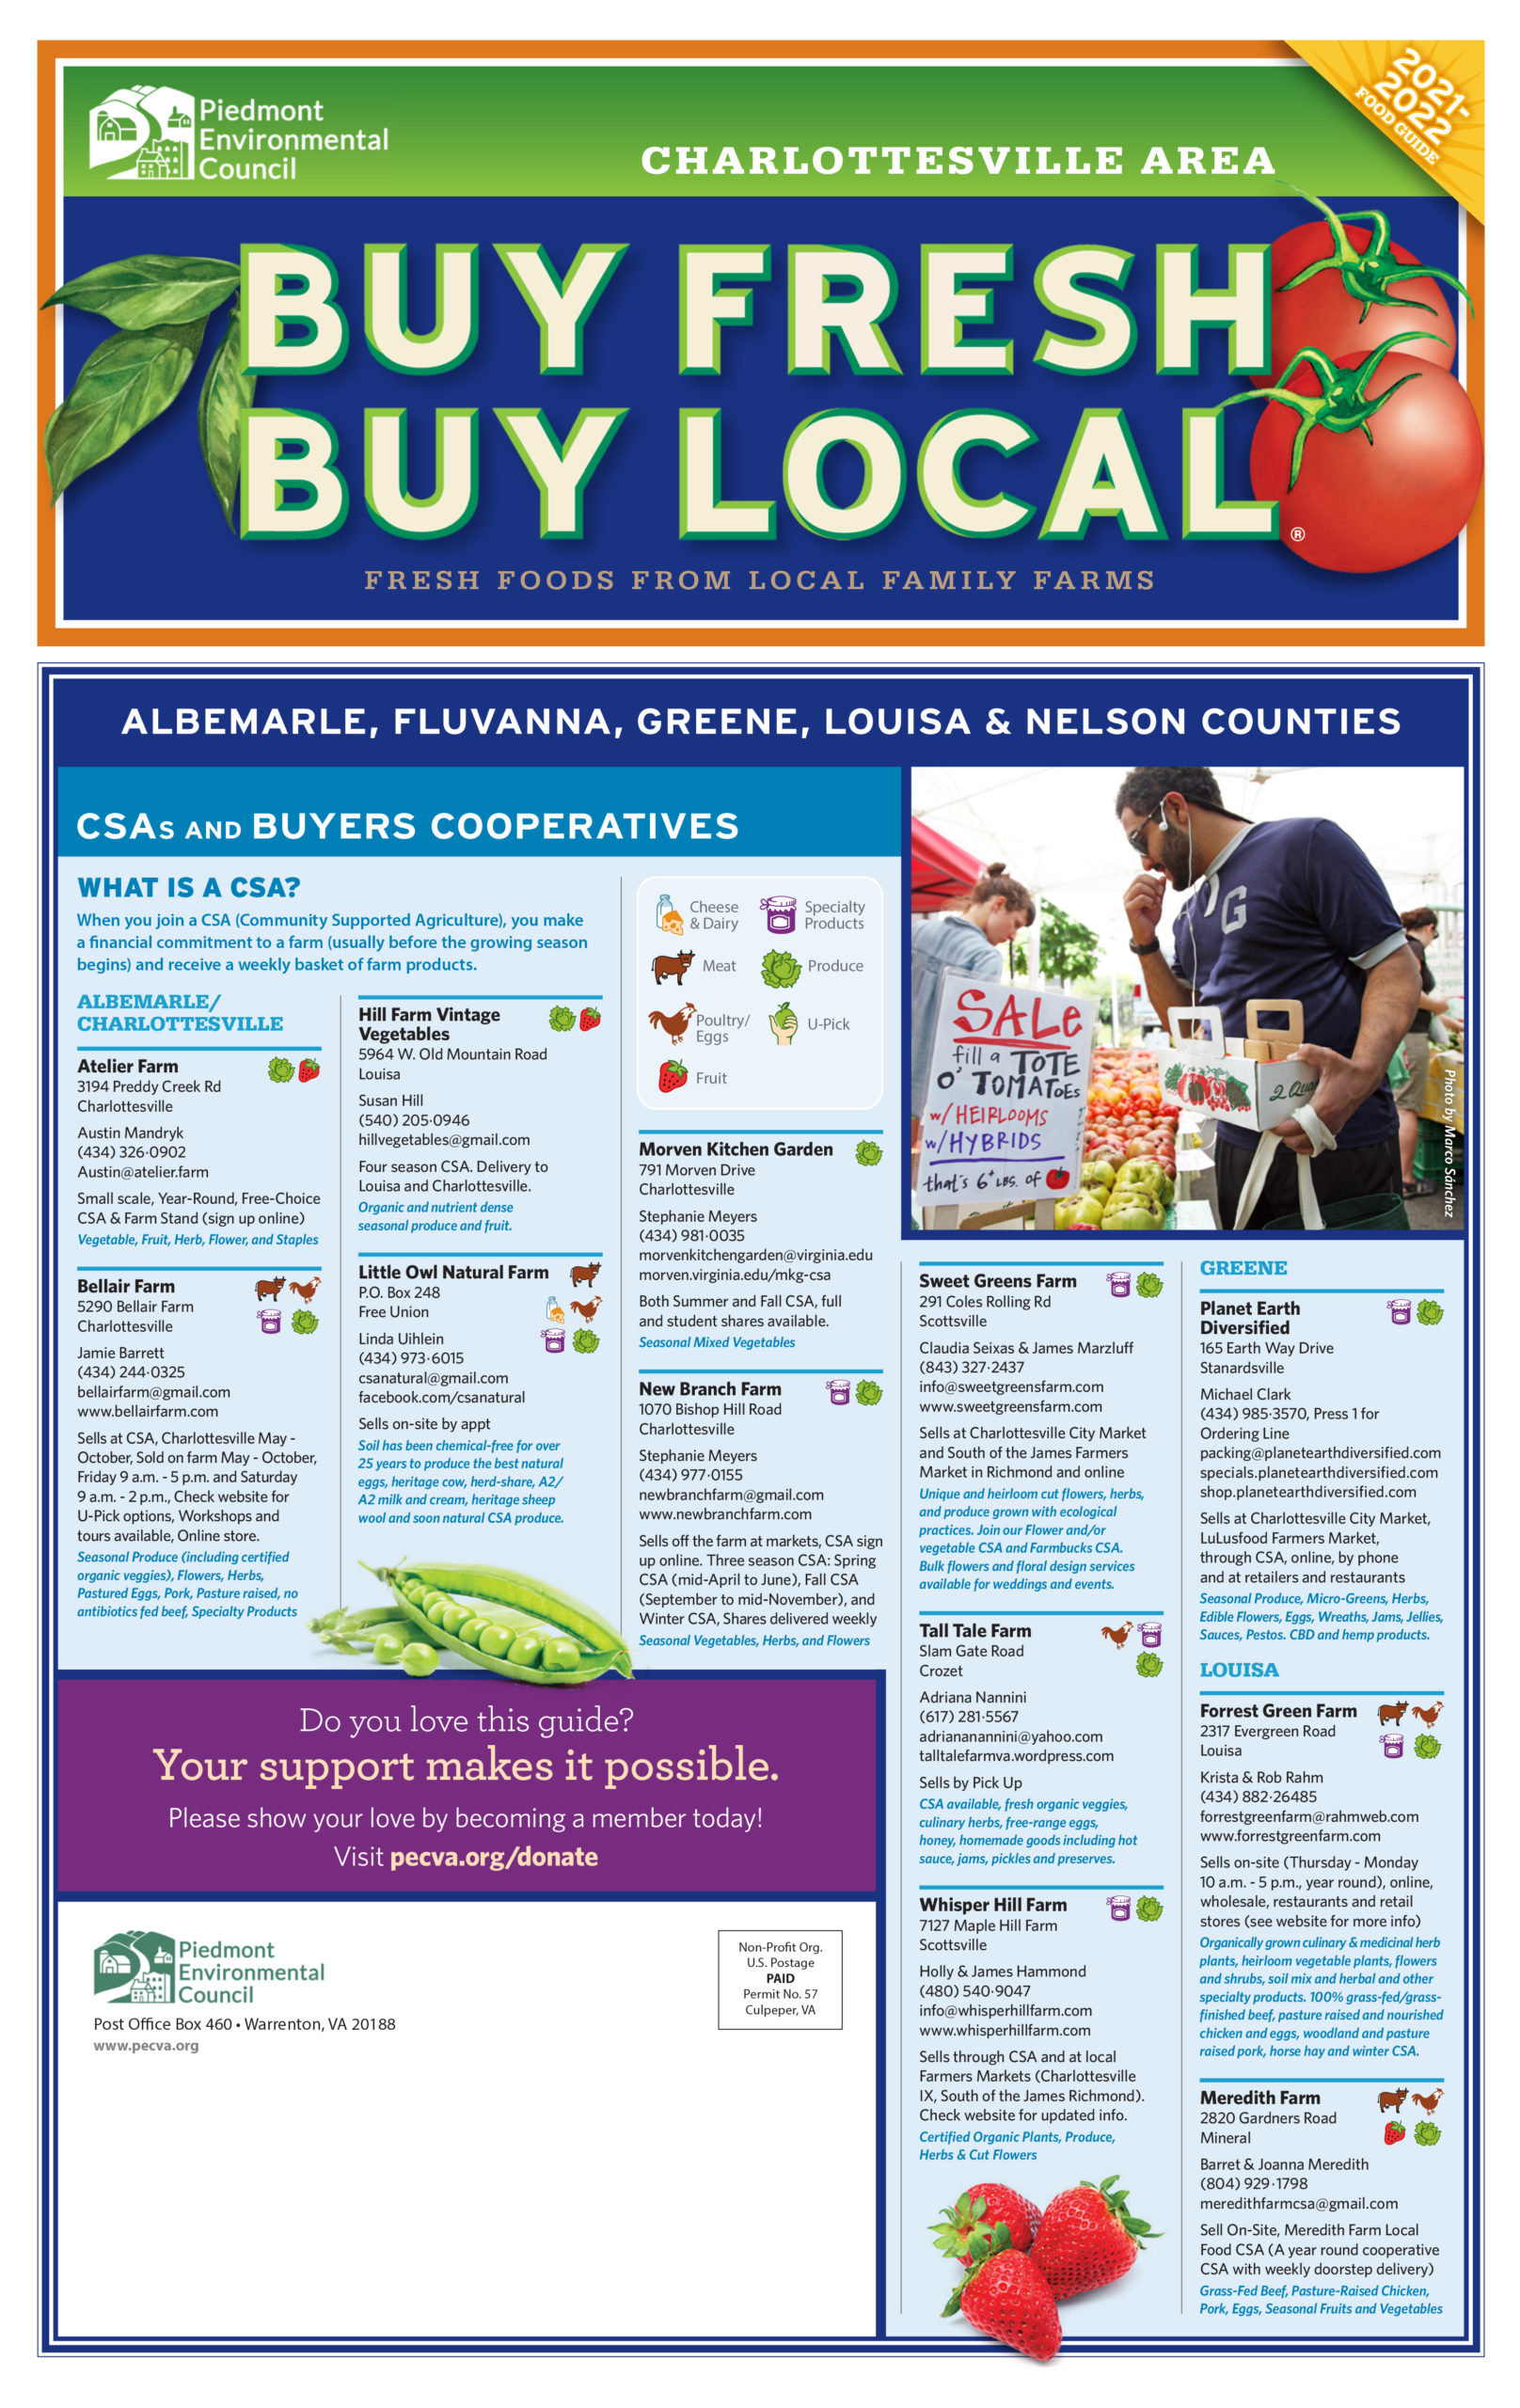 Cover image of the Charlottesville Area Buy Fresh Buy Local guide